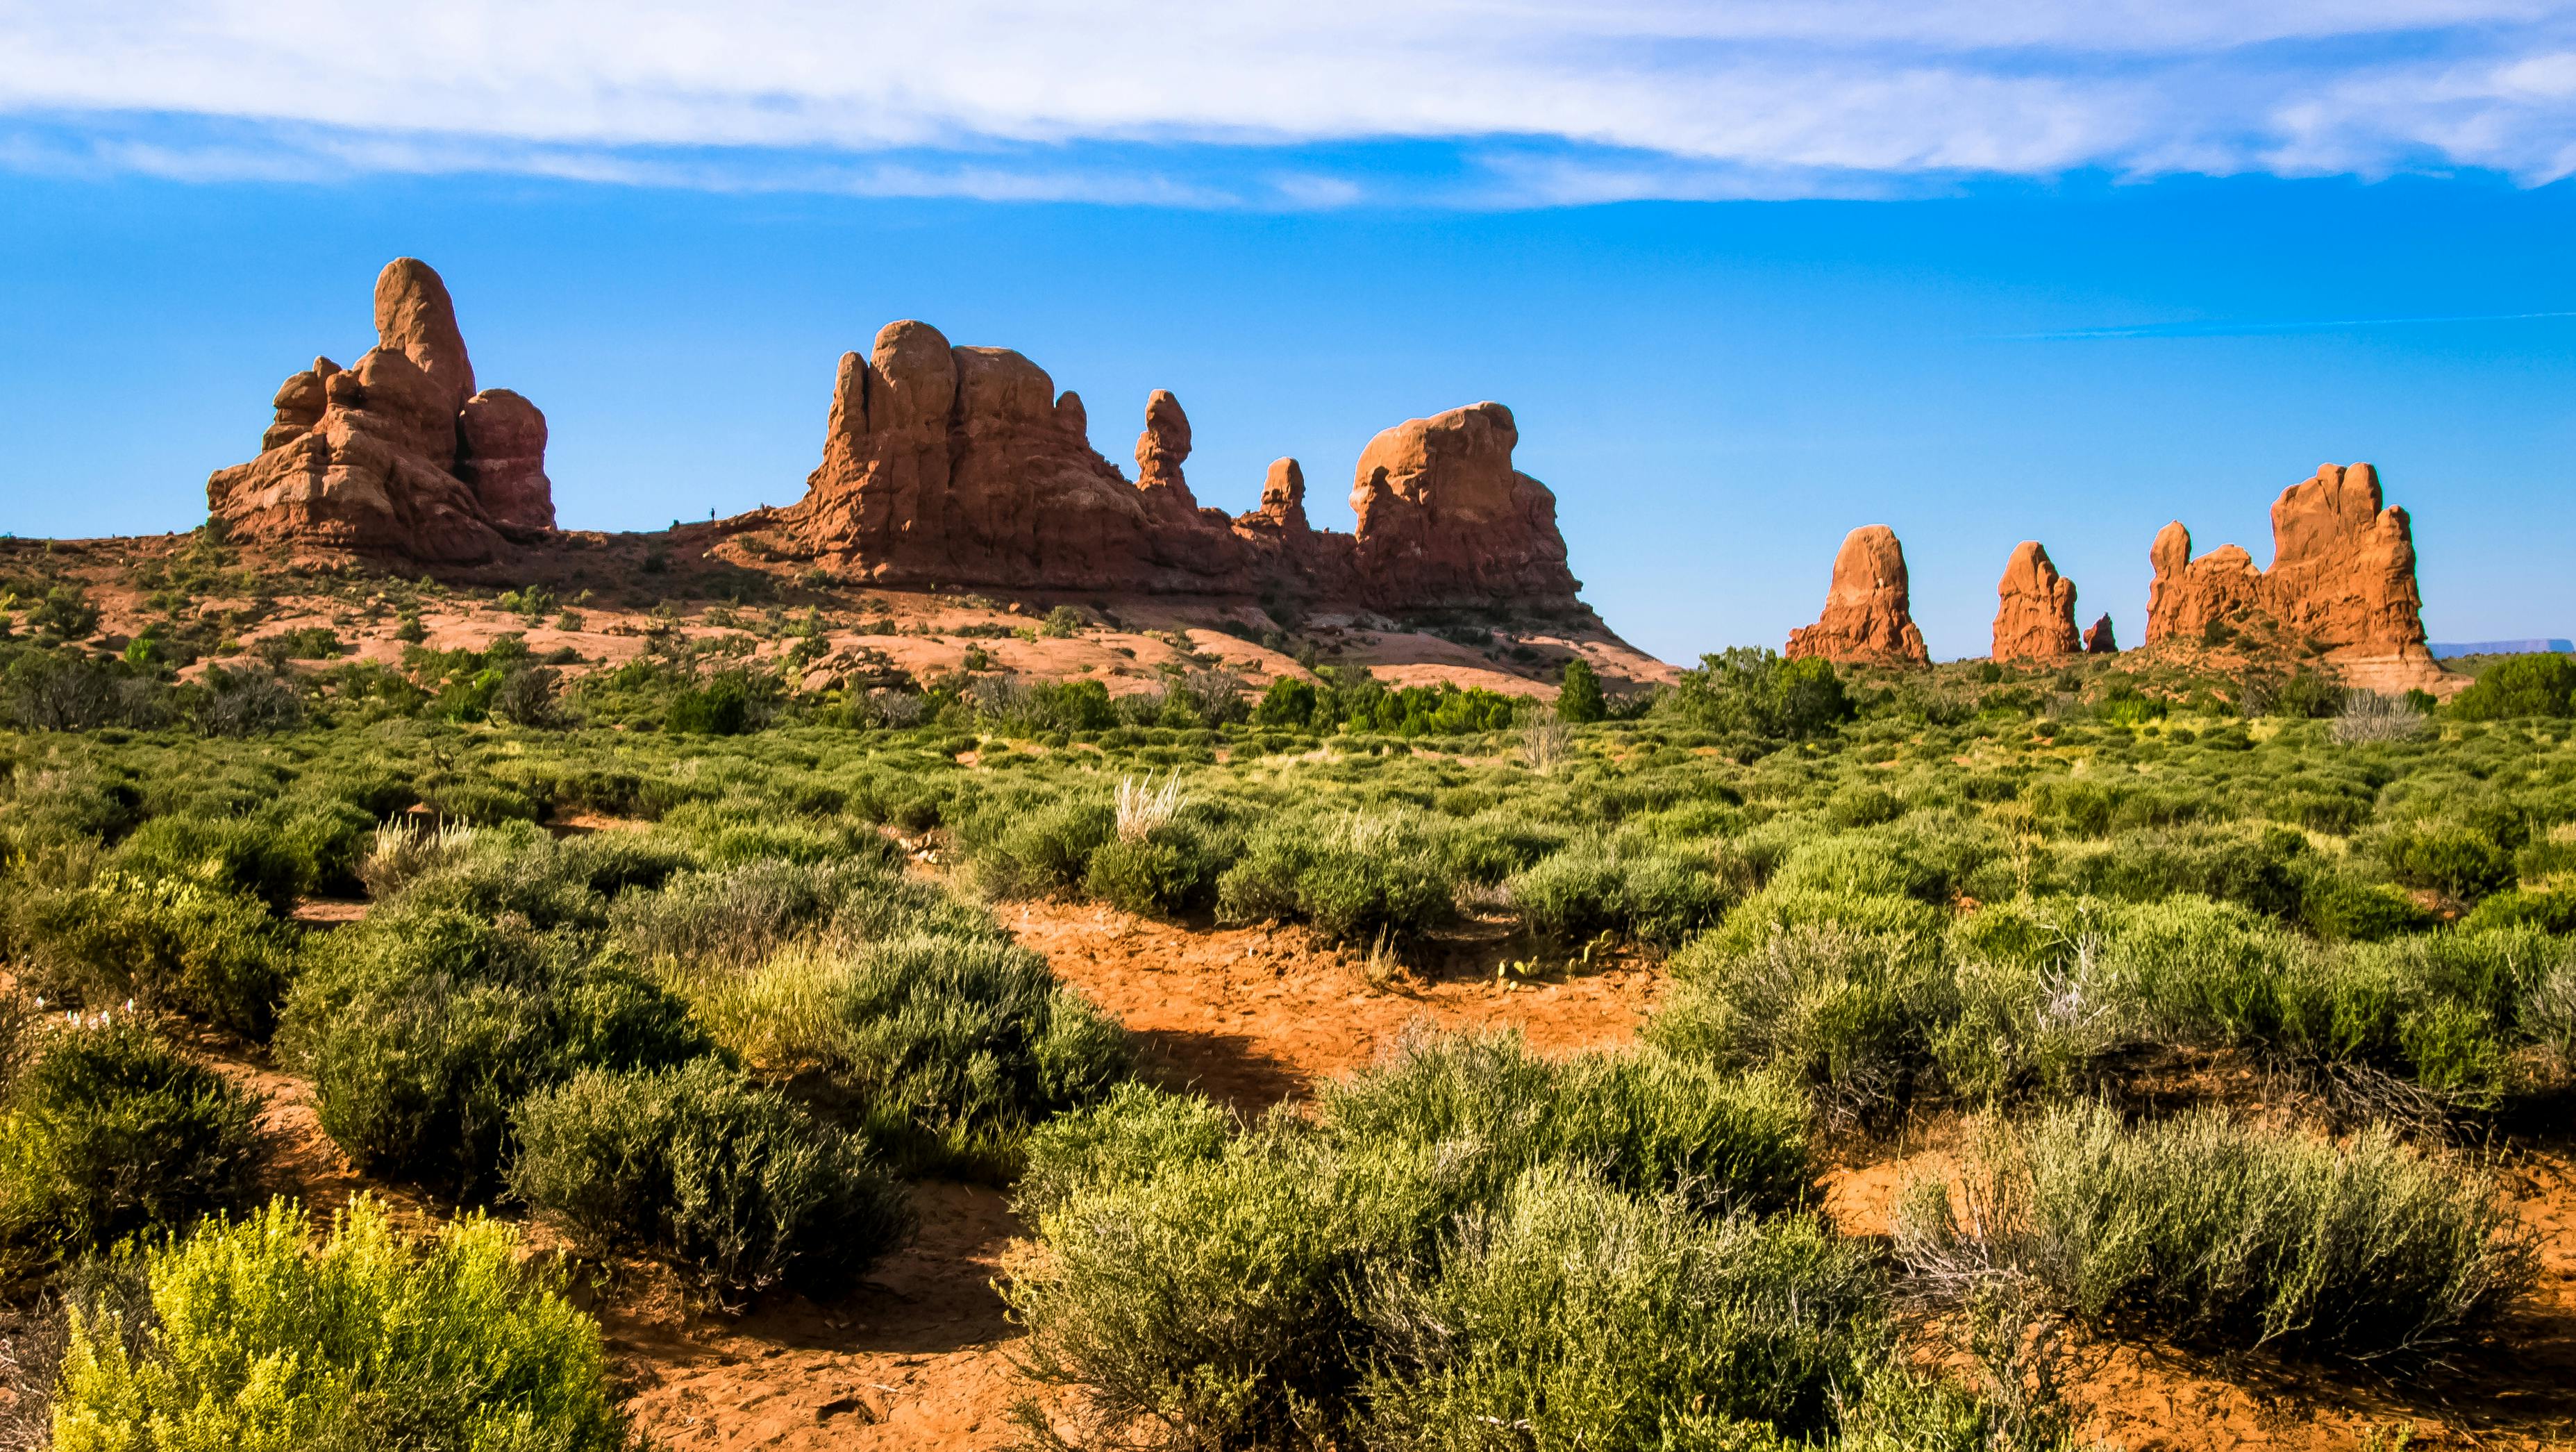 Sandstone Towers Arches National Park, Utah. Creative Commons Ian D. Keating-2016